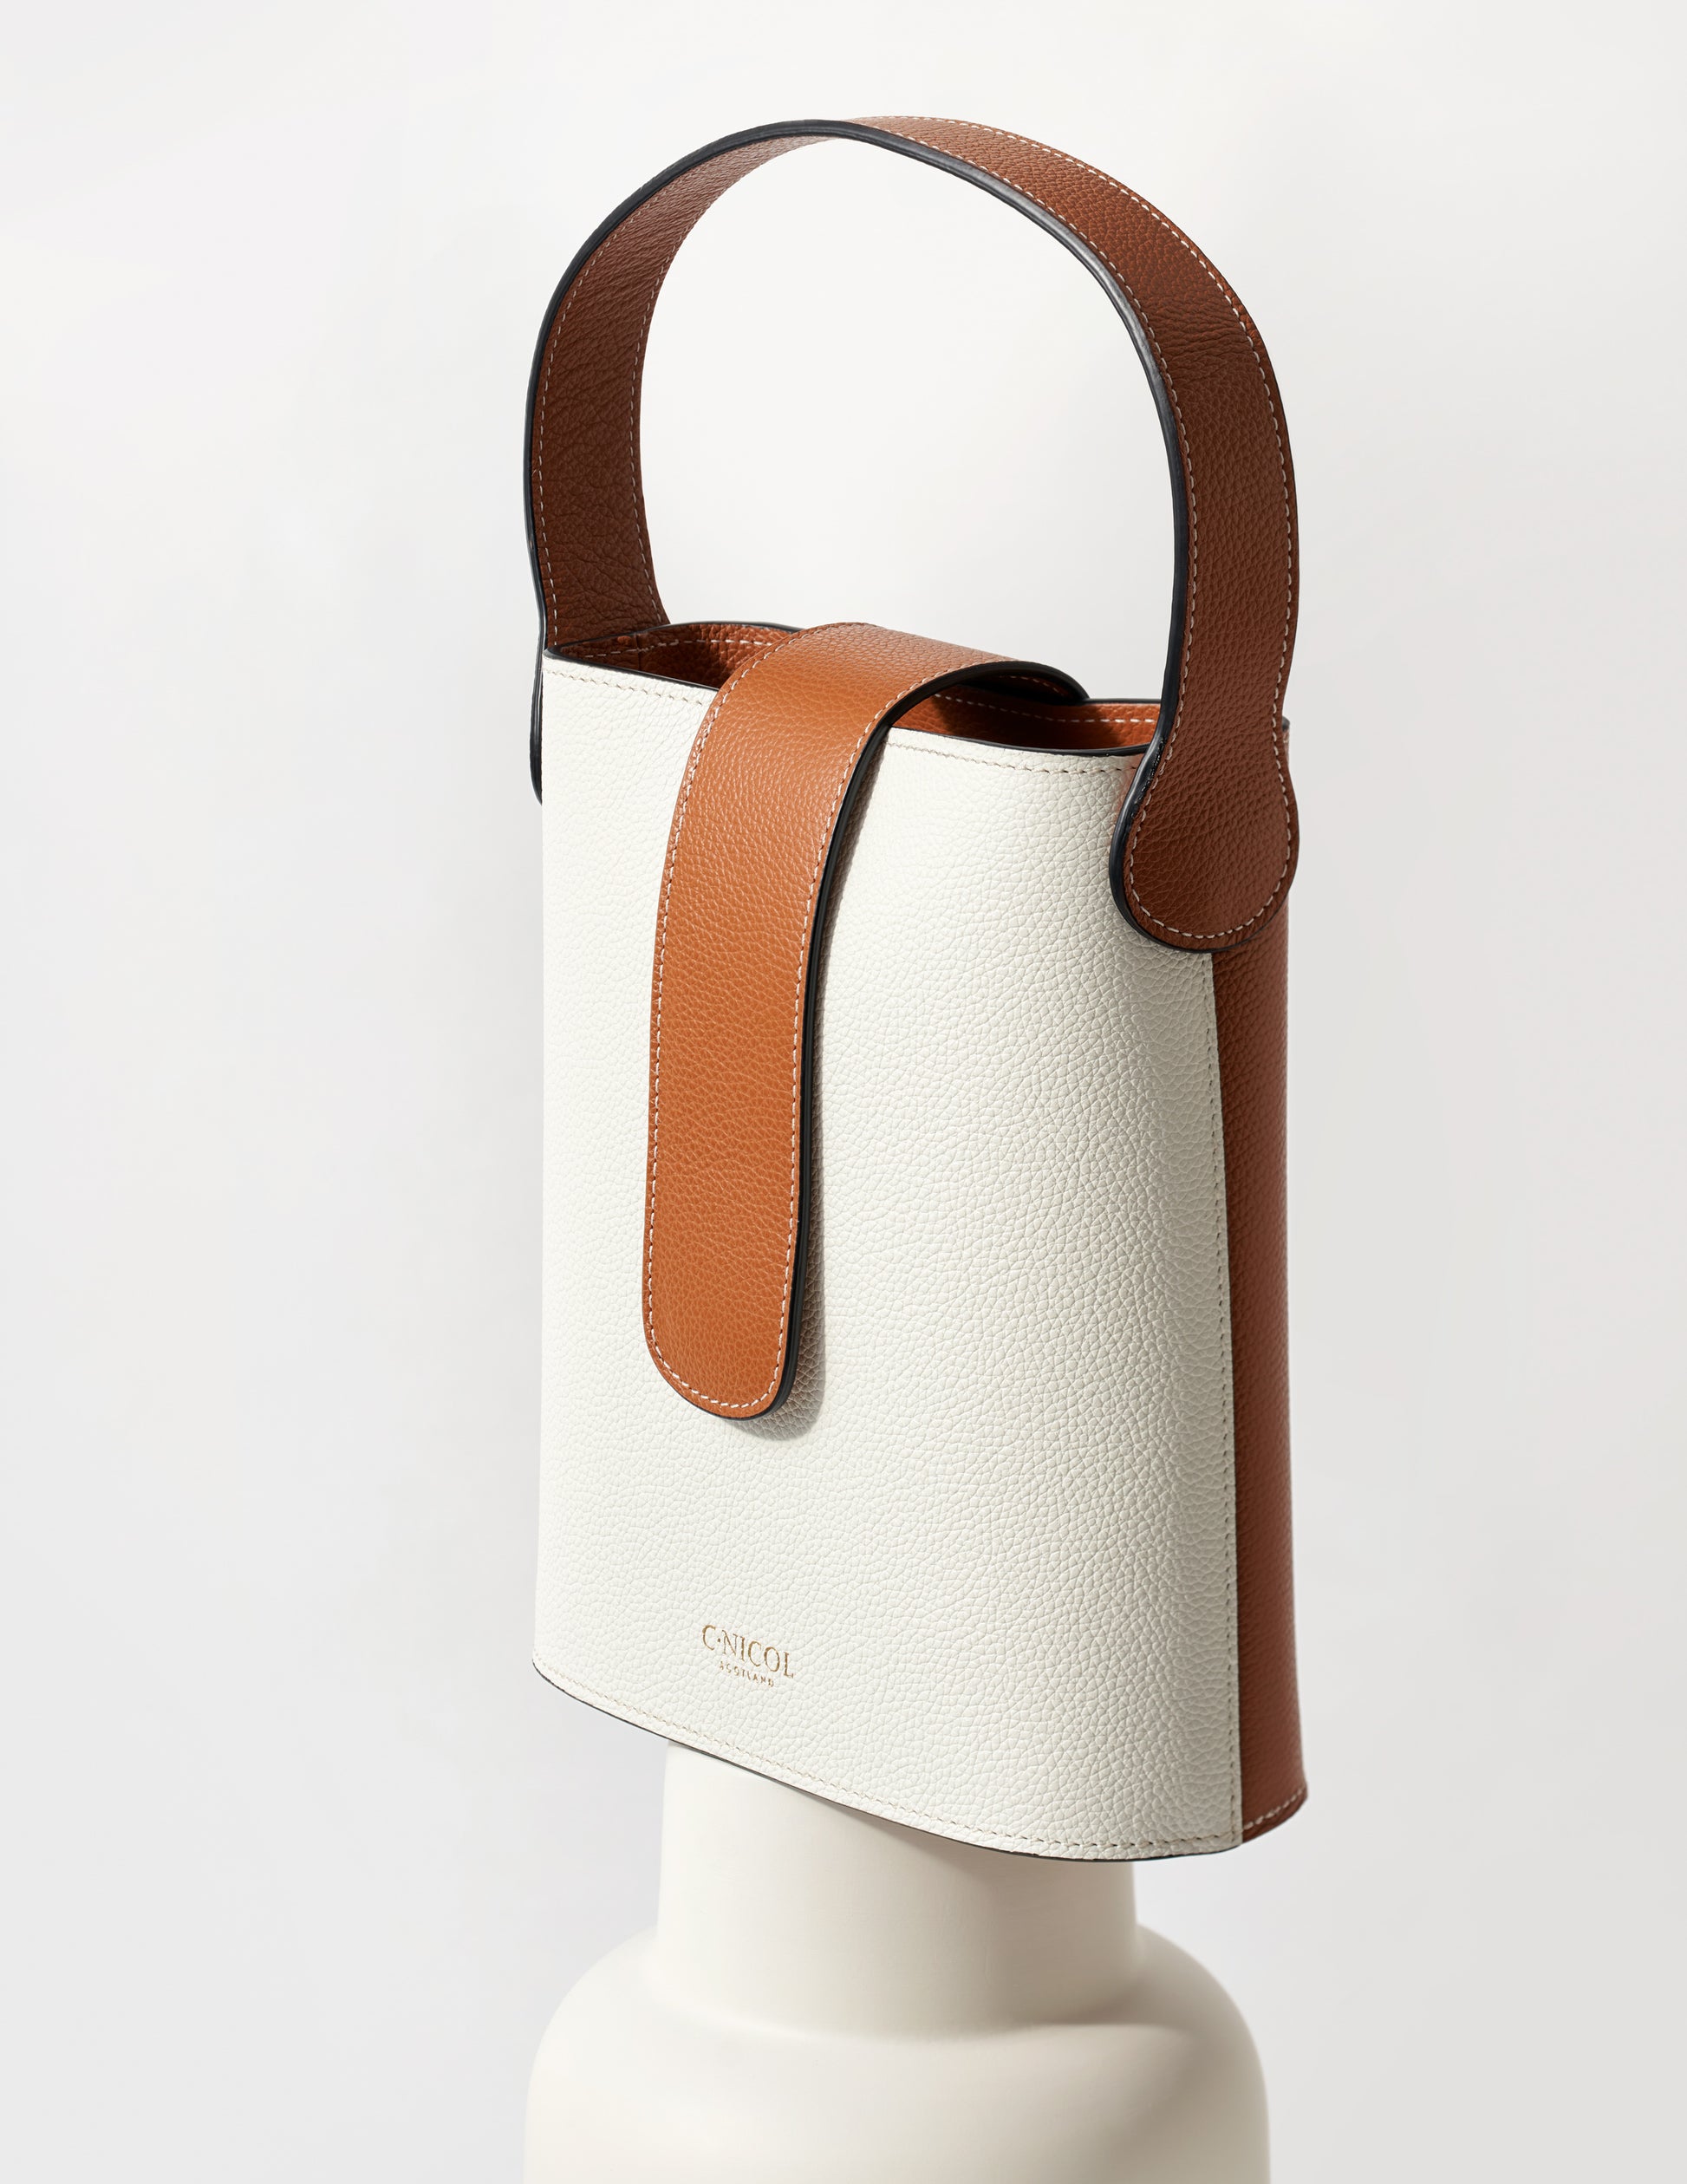 Cnicol Brown and White Leather Holly Bag on White Base